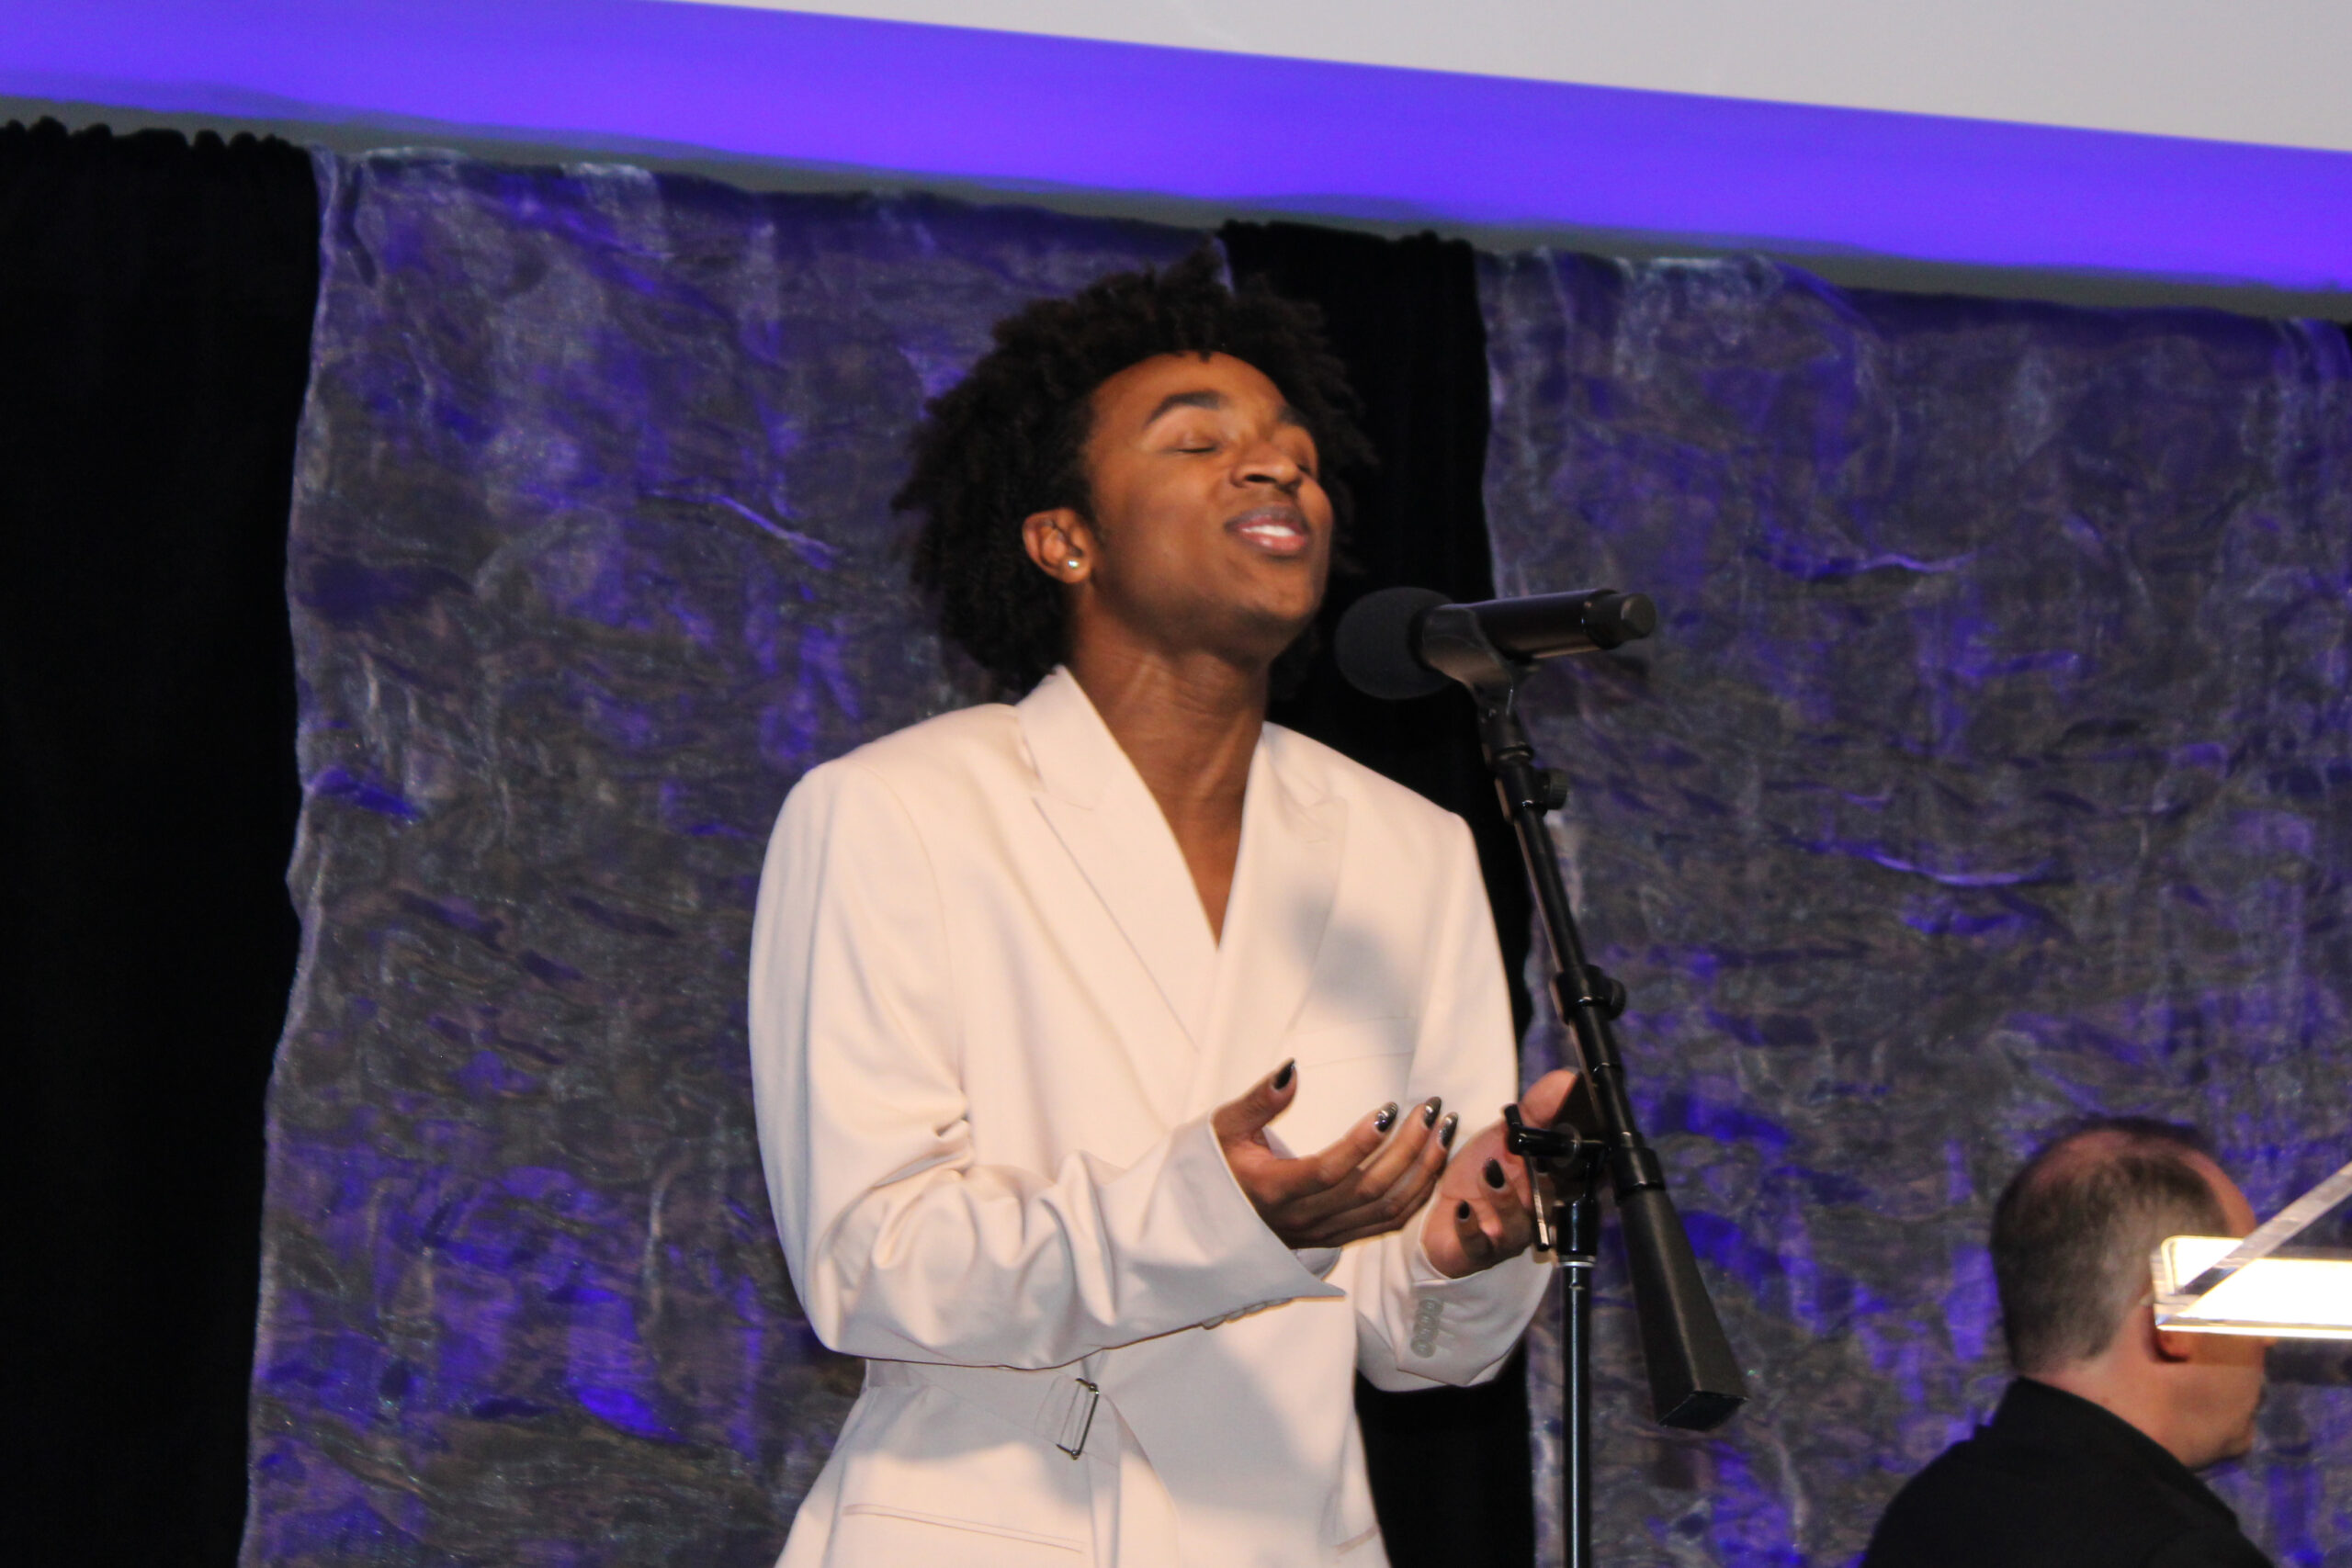 2023 NC Deans' MLK Spirit Awards —Timmy Thompson (Vocalist) and Tyler Driskill (Piano) performing
“Anyone Can Whistle” by Stephen Sondheim